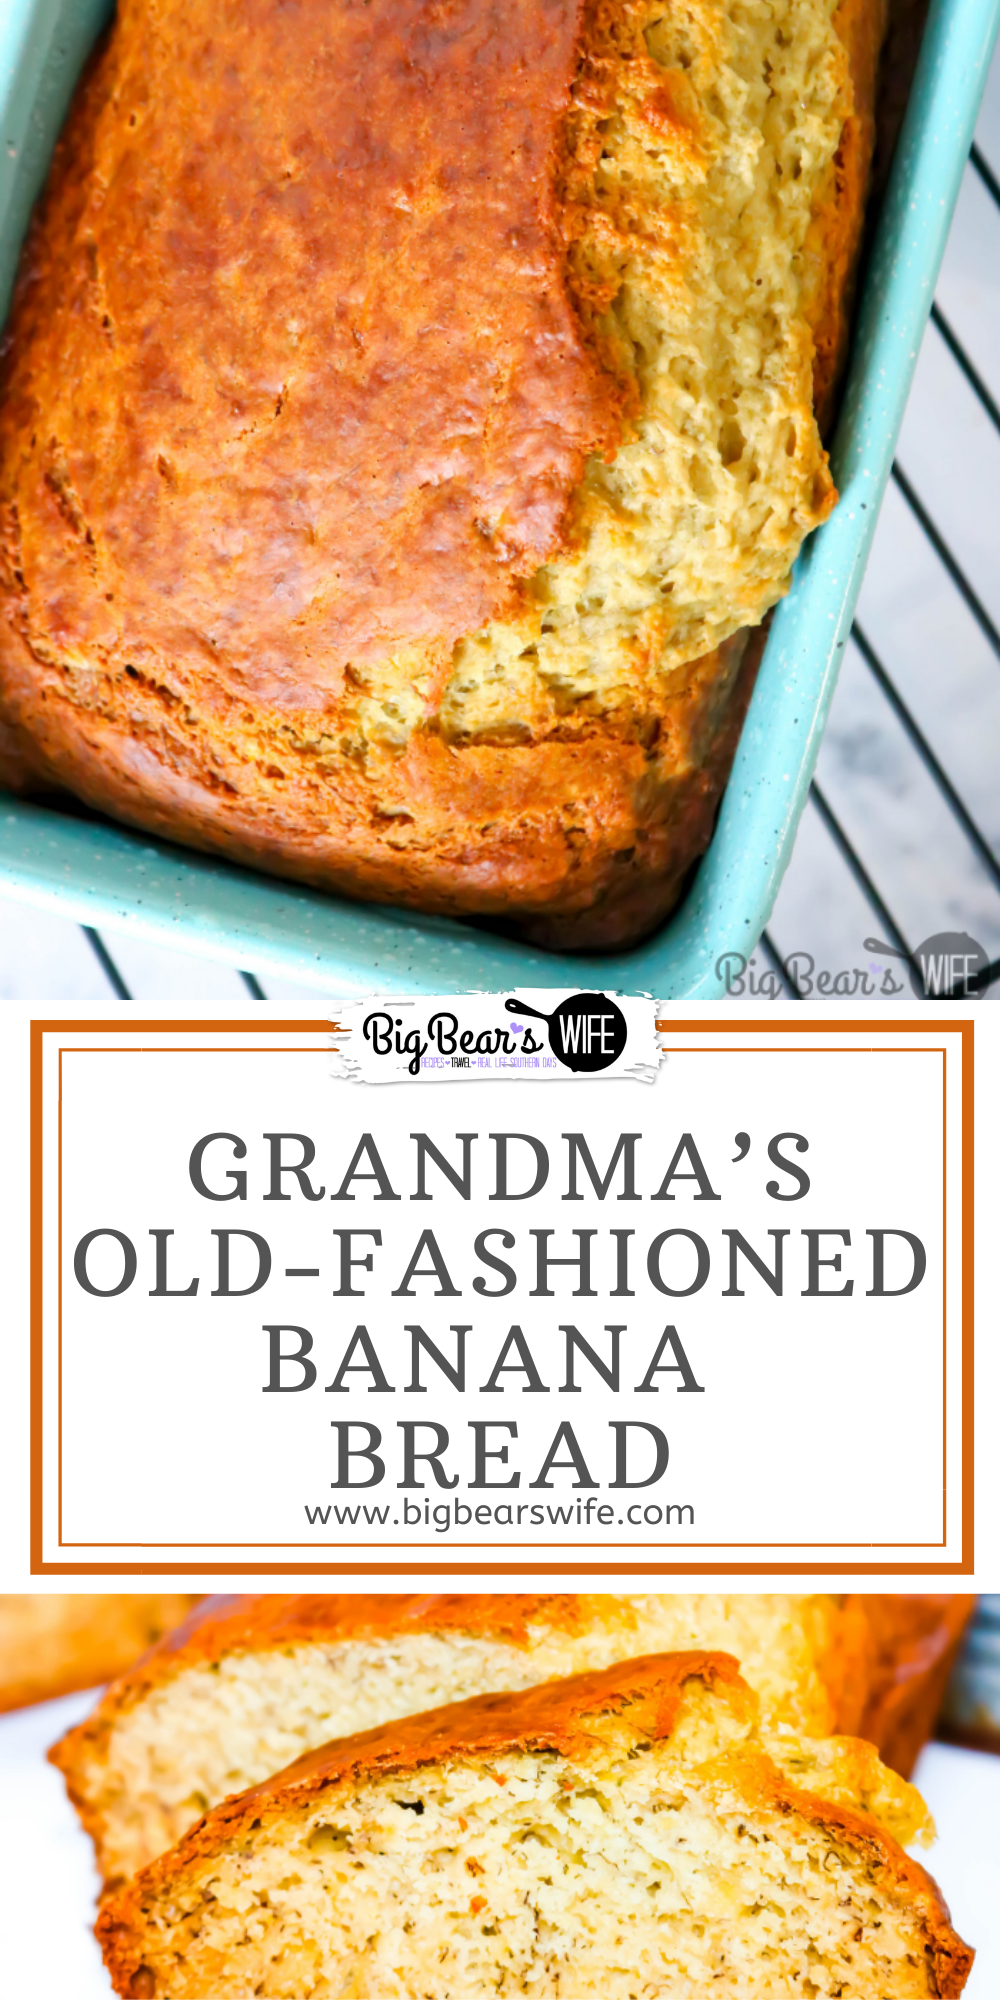 Grandma's Old-Fashioned Banana Bread is sure to become a family favorite. This banana bread recipe is super easy to make and takes 45 minutes to bake! via @bigbearswife